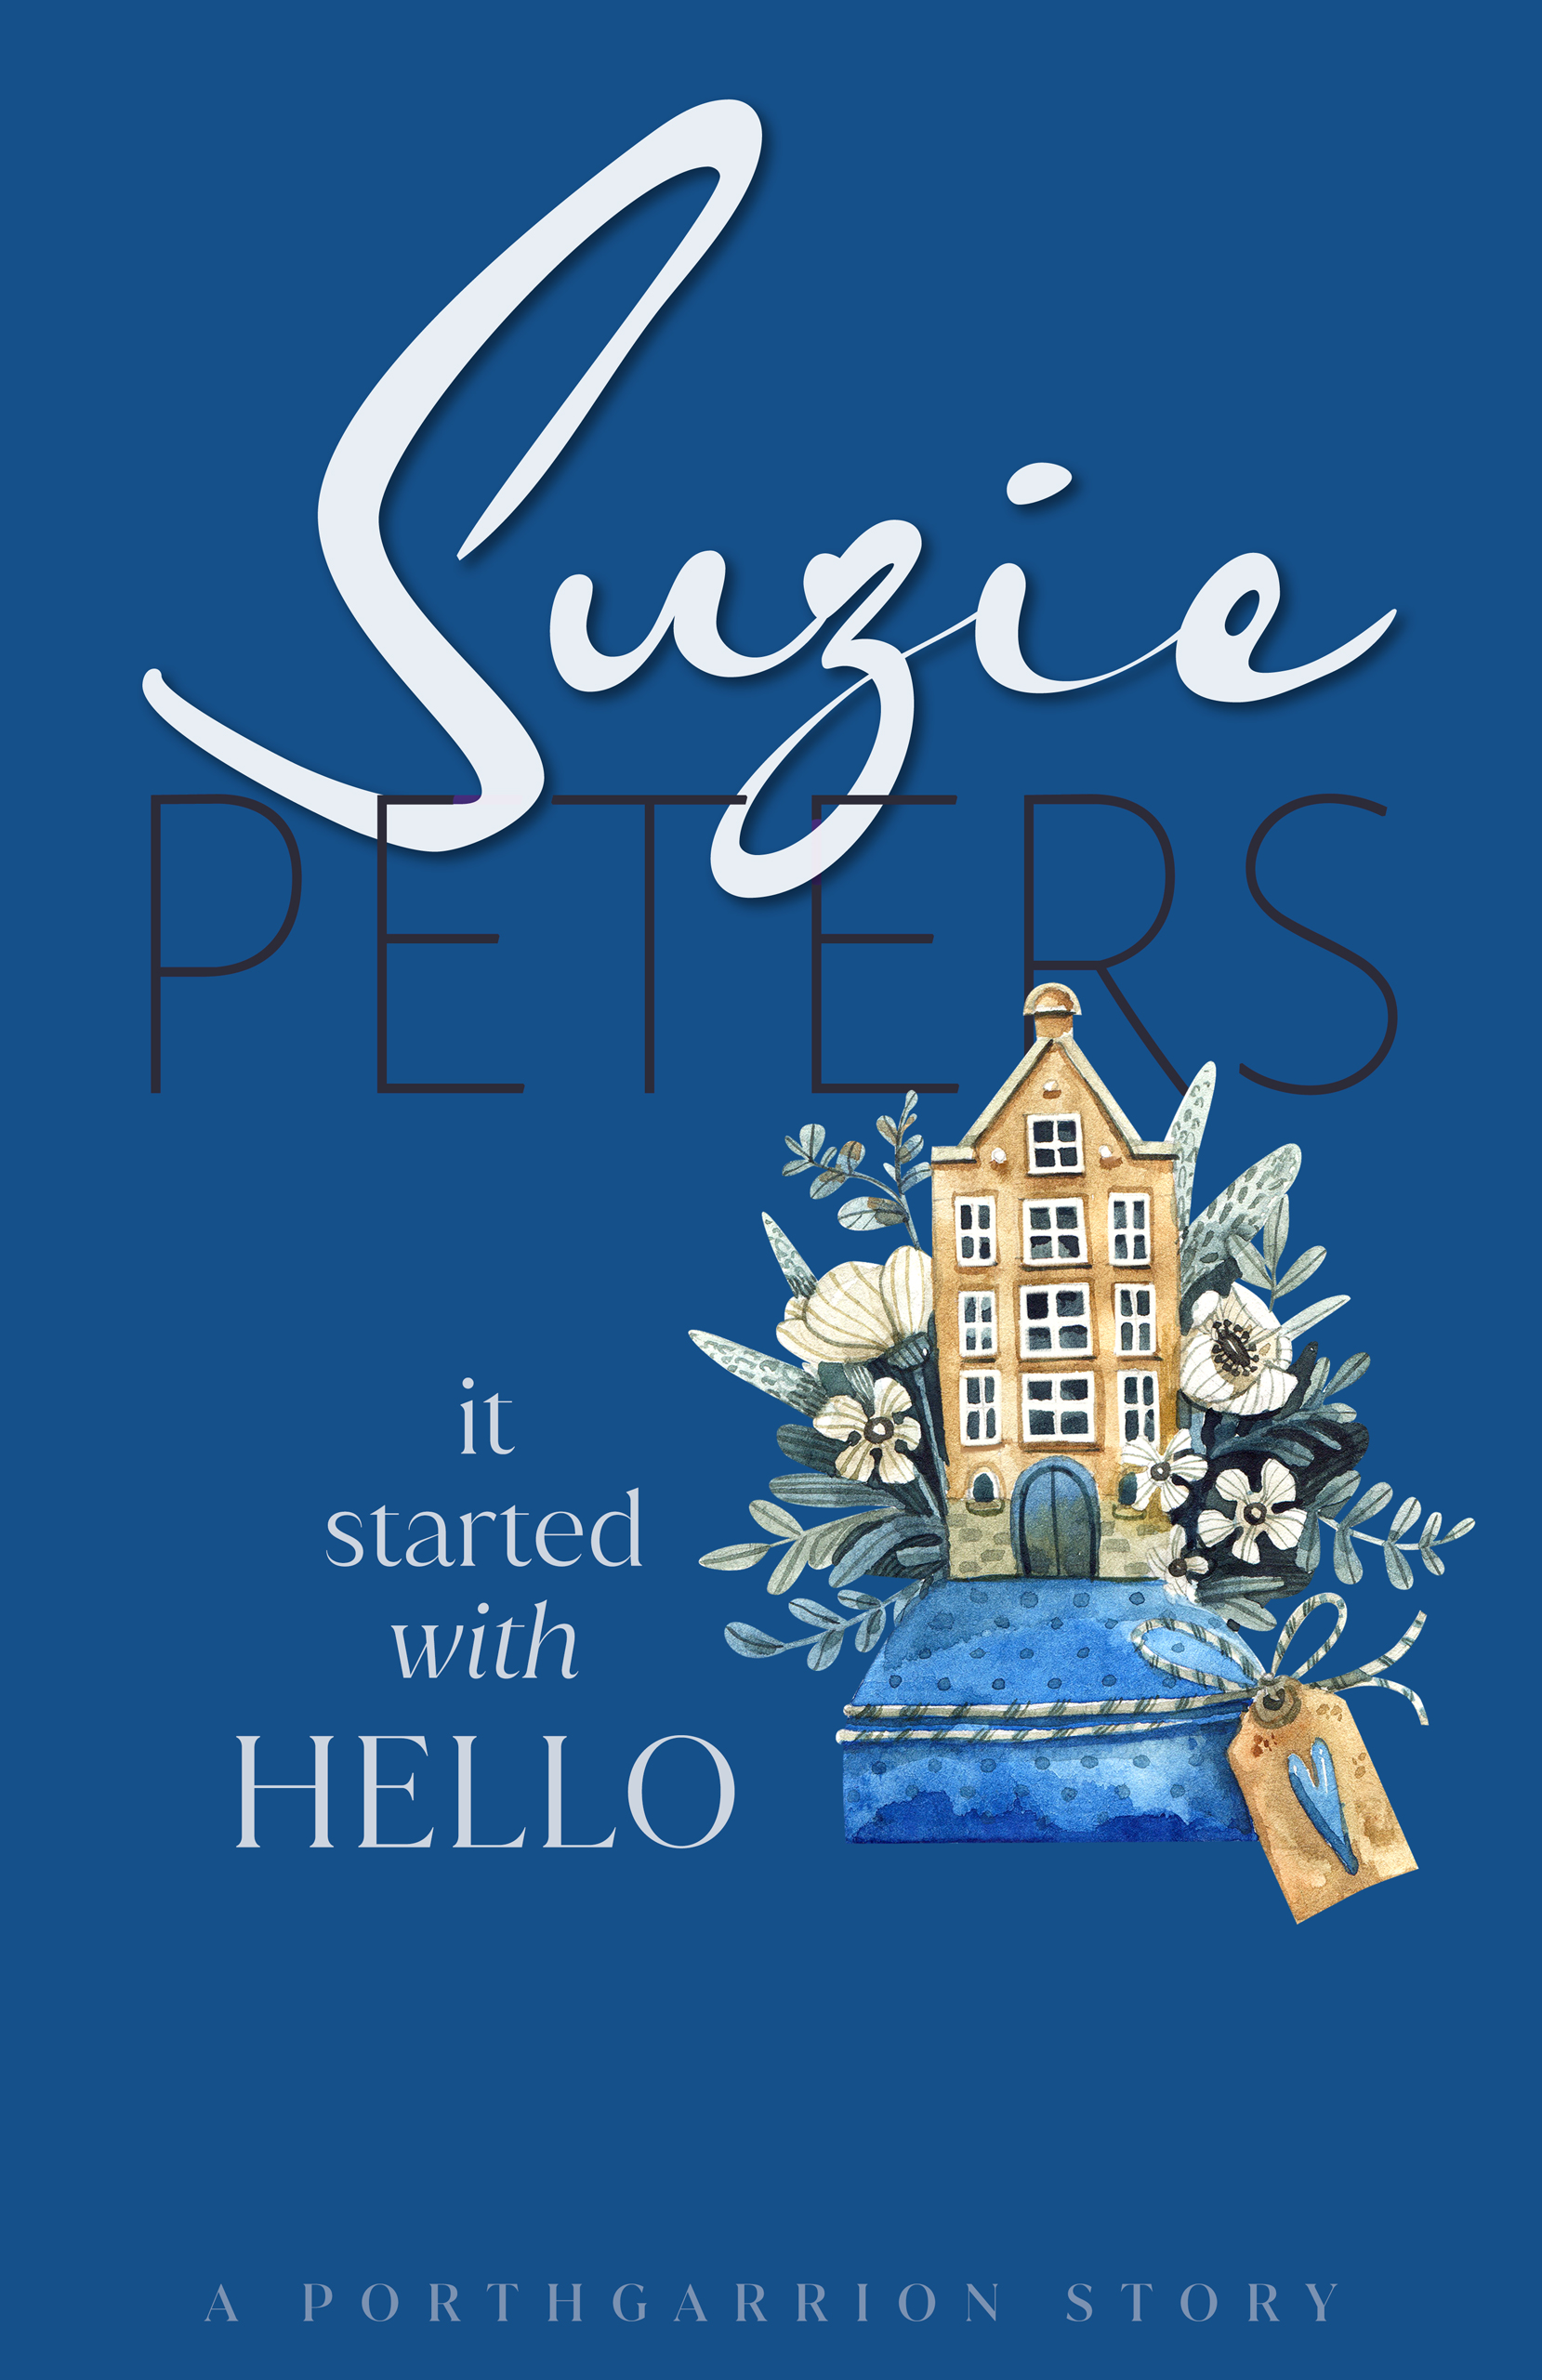 Porthgarrion Series: It Started with Hello by Suzie Peters.